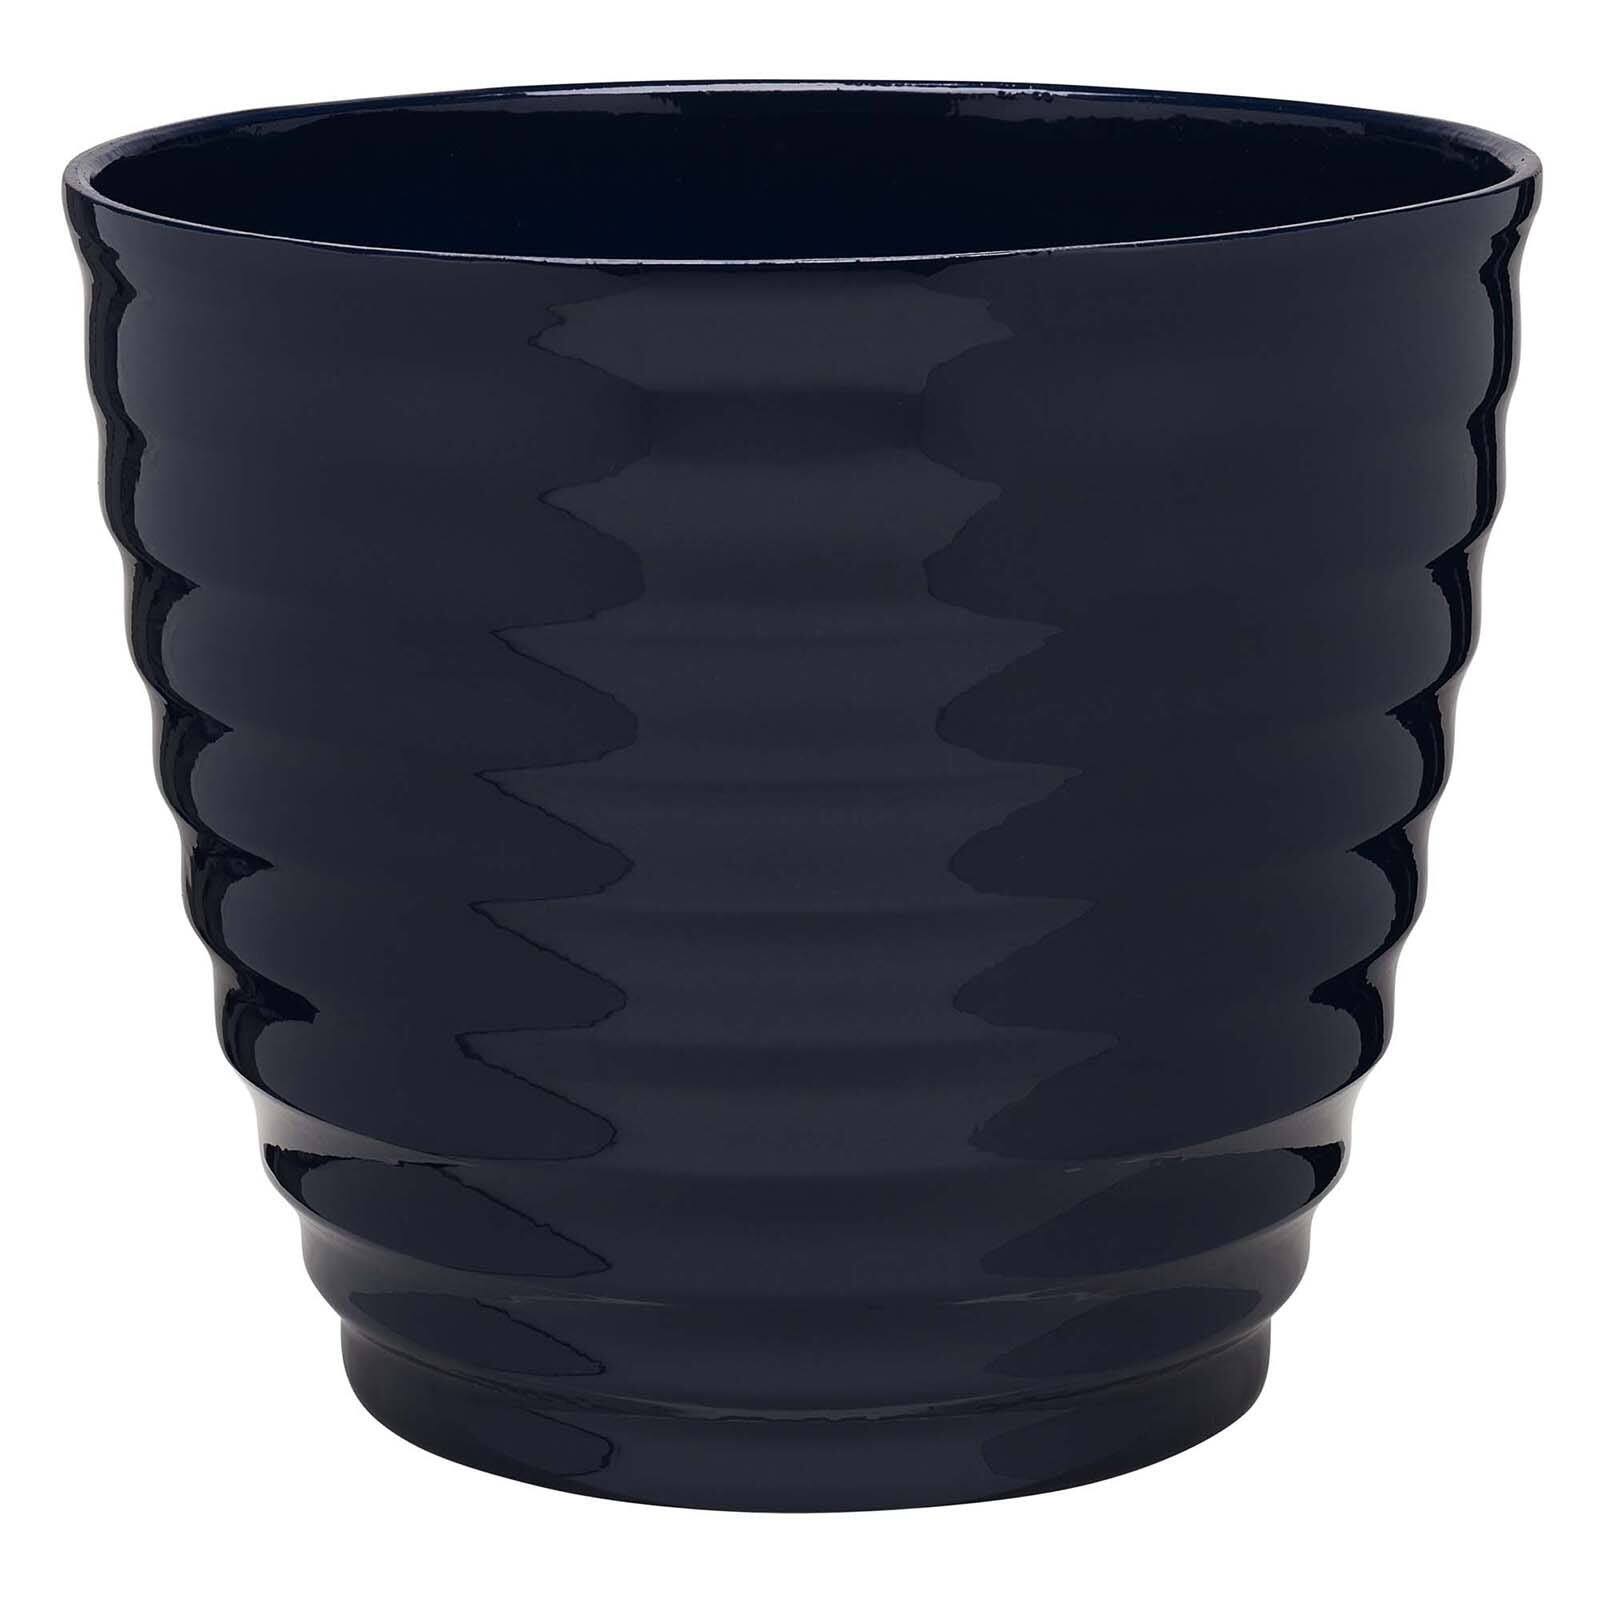 16" Beehive Planter w/ Saucer, Navy - Southern Patio